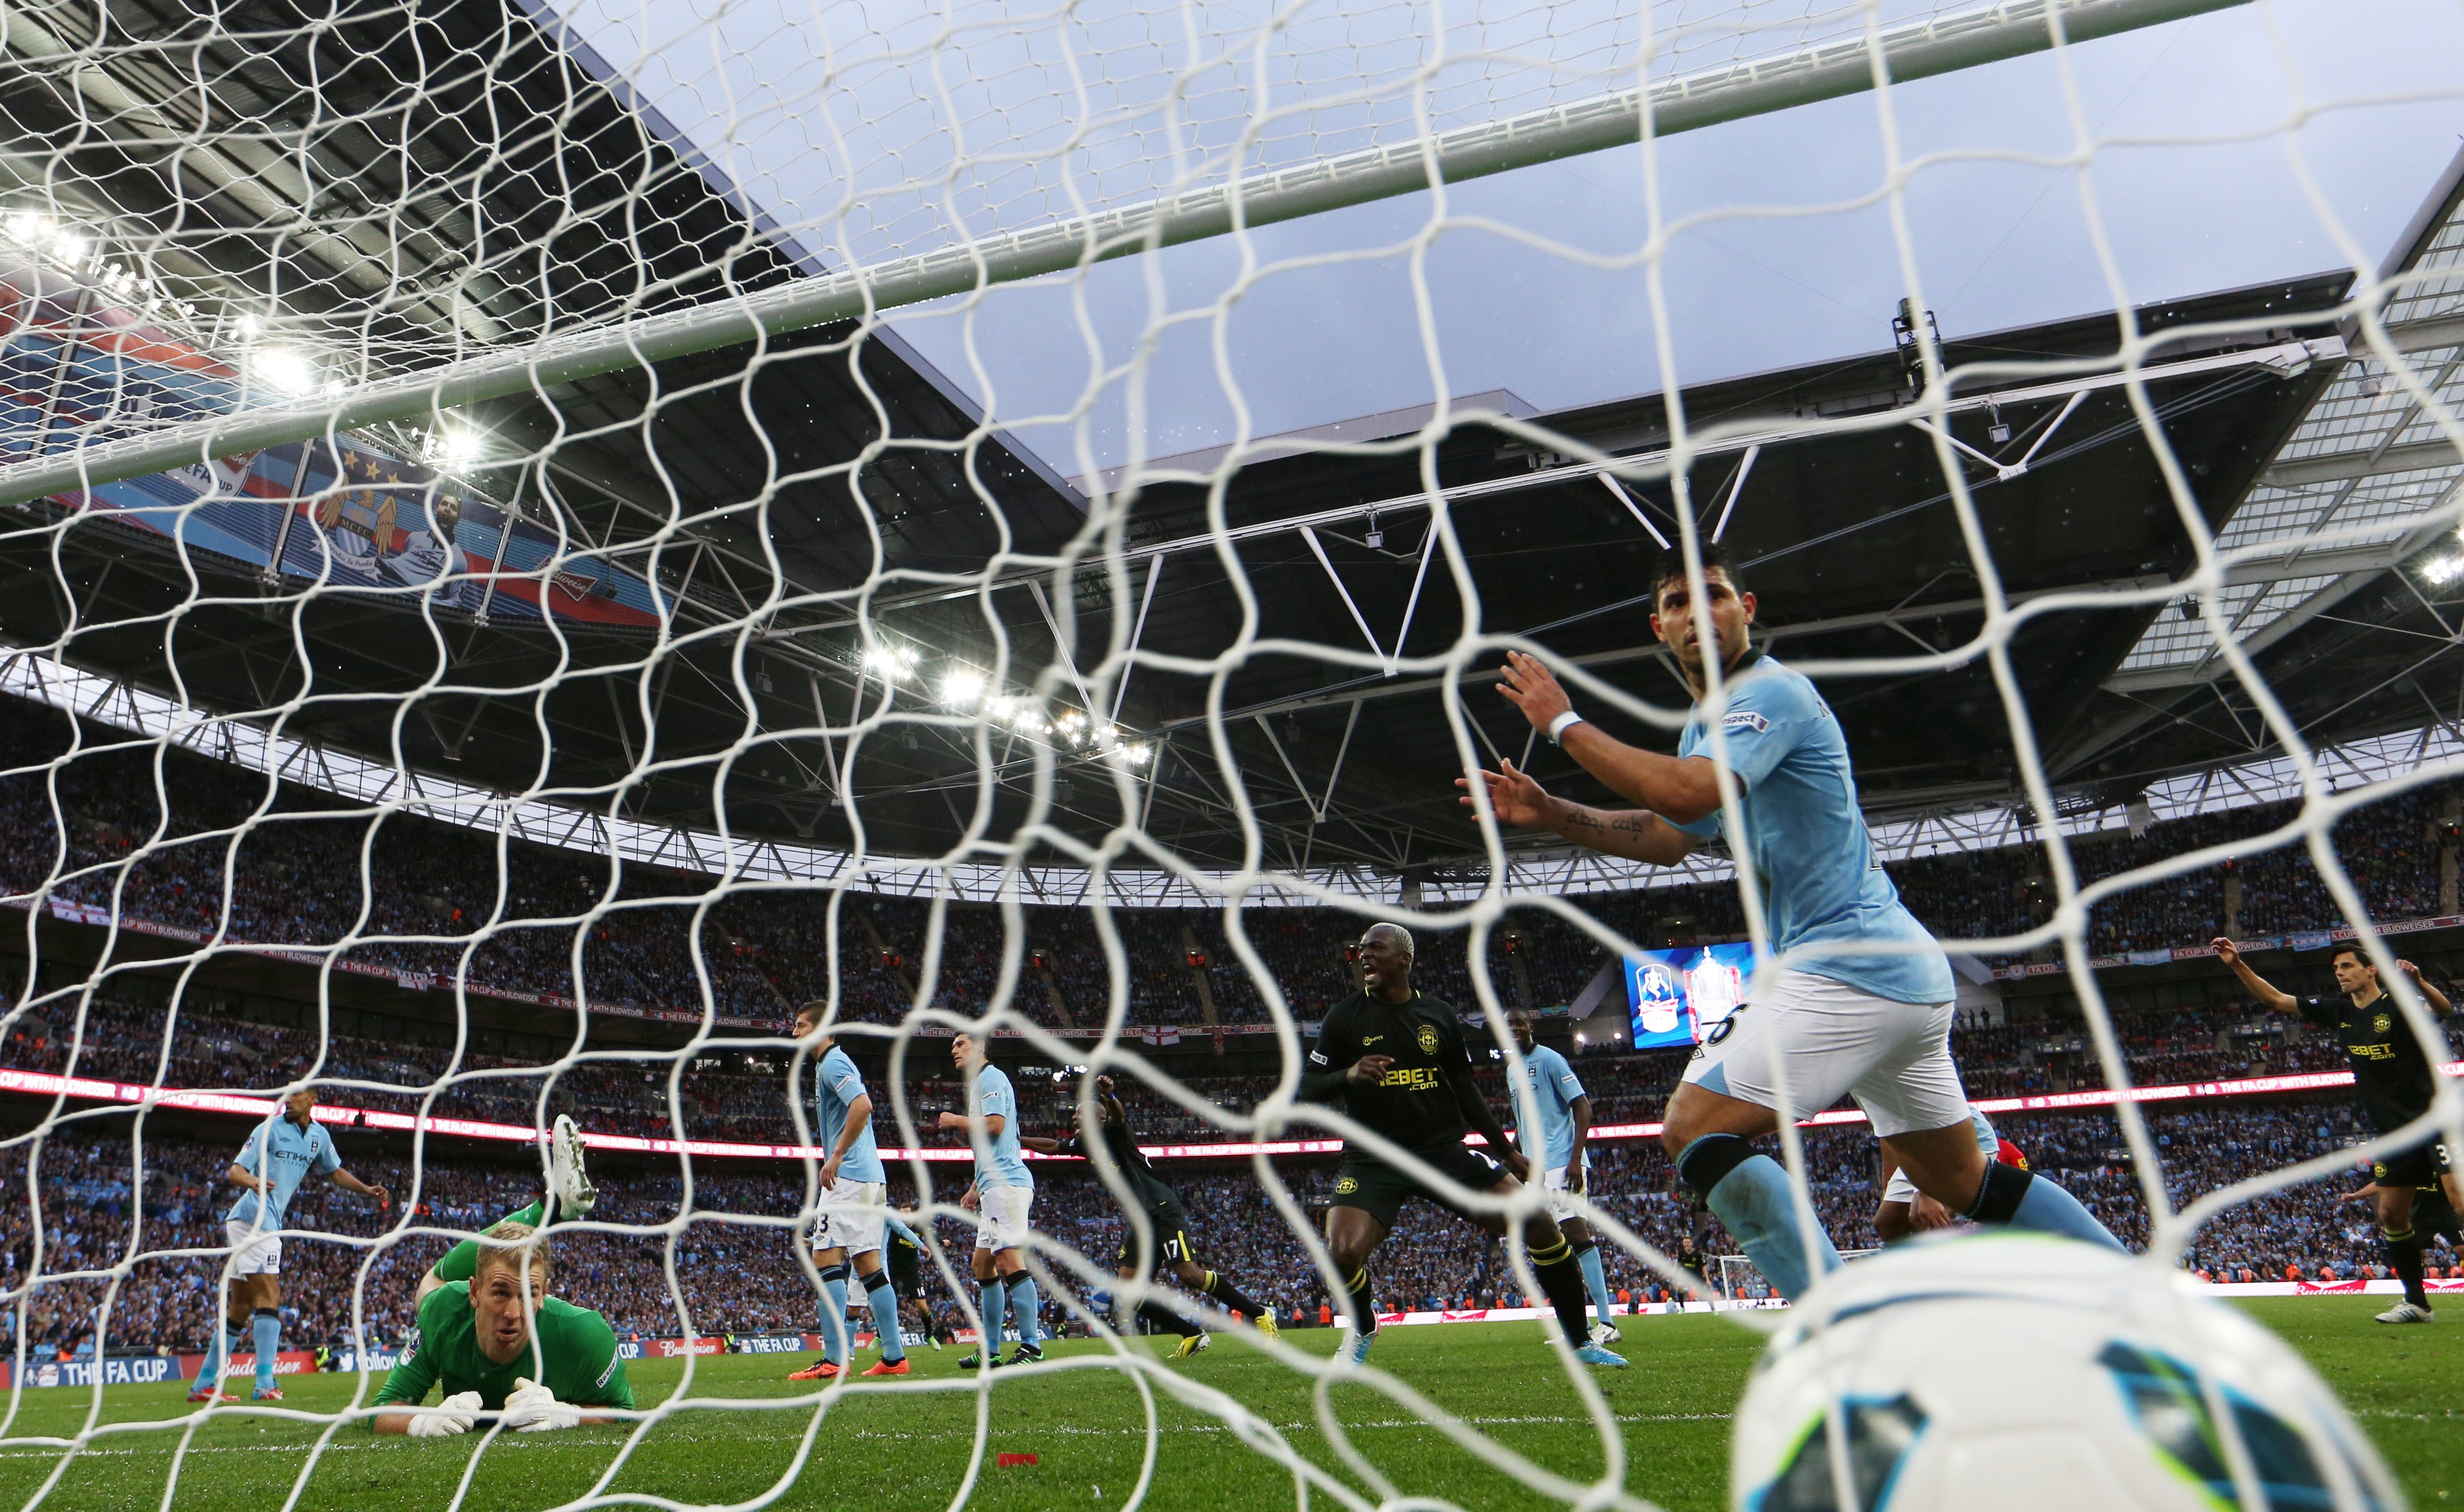 Wigan scoring against Manchester City in the FA Cup